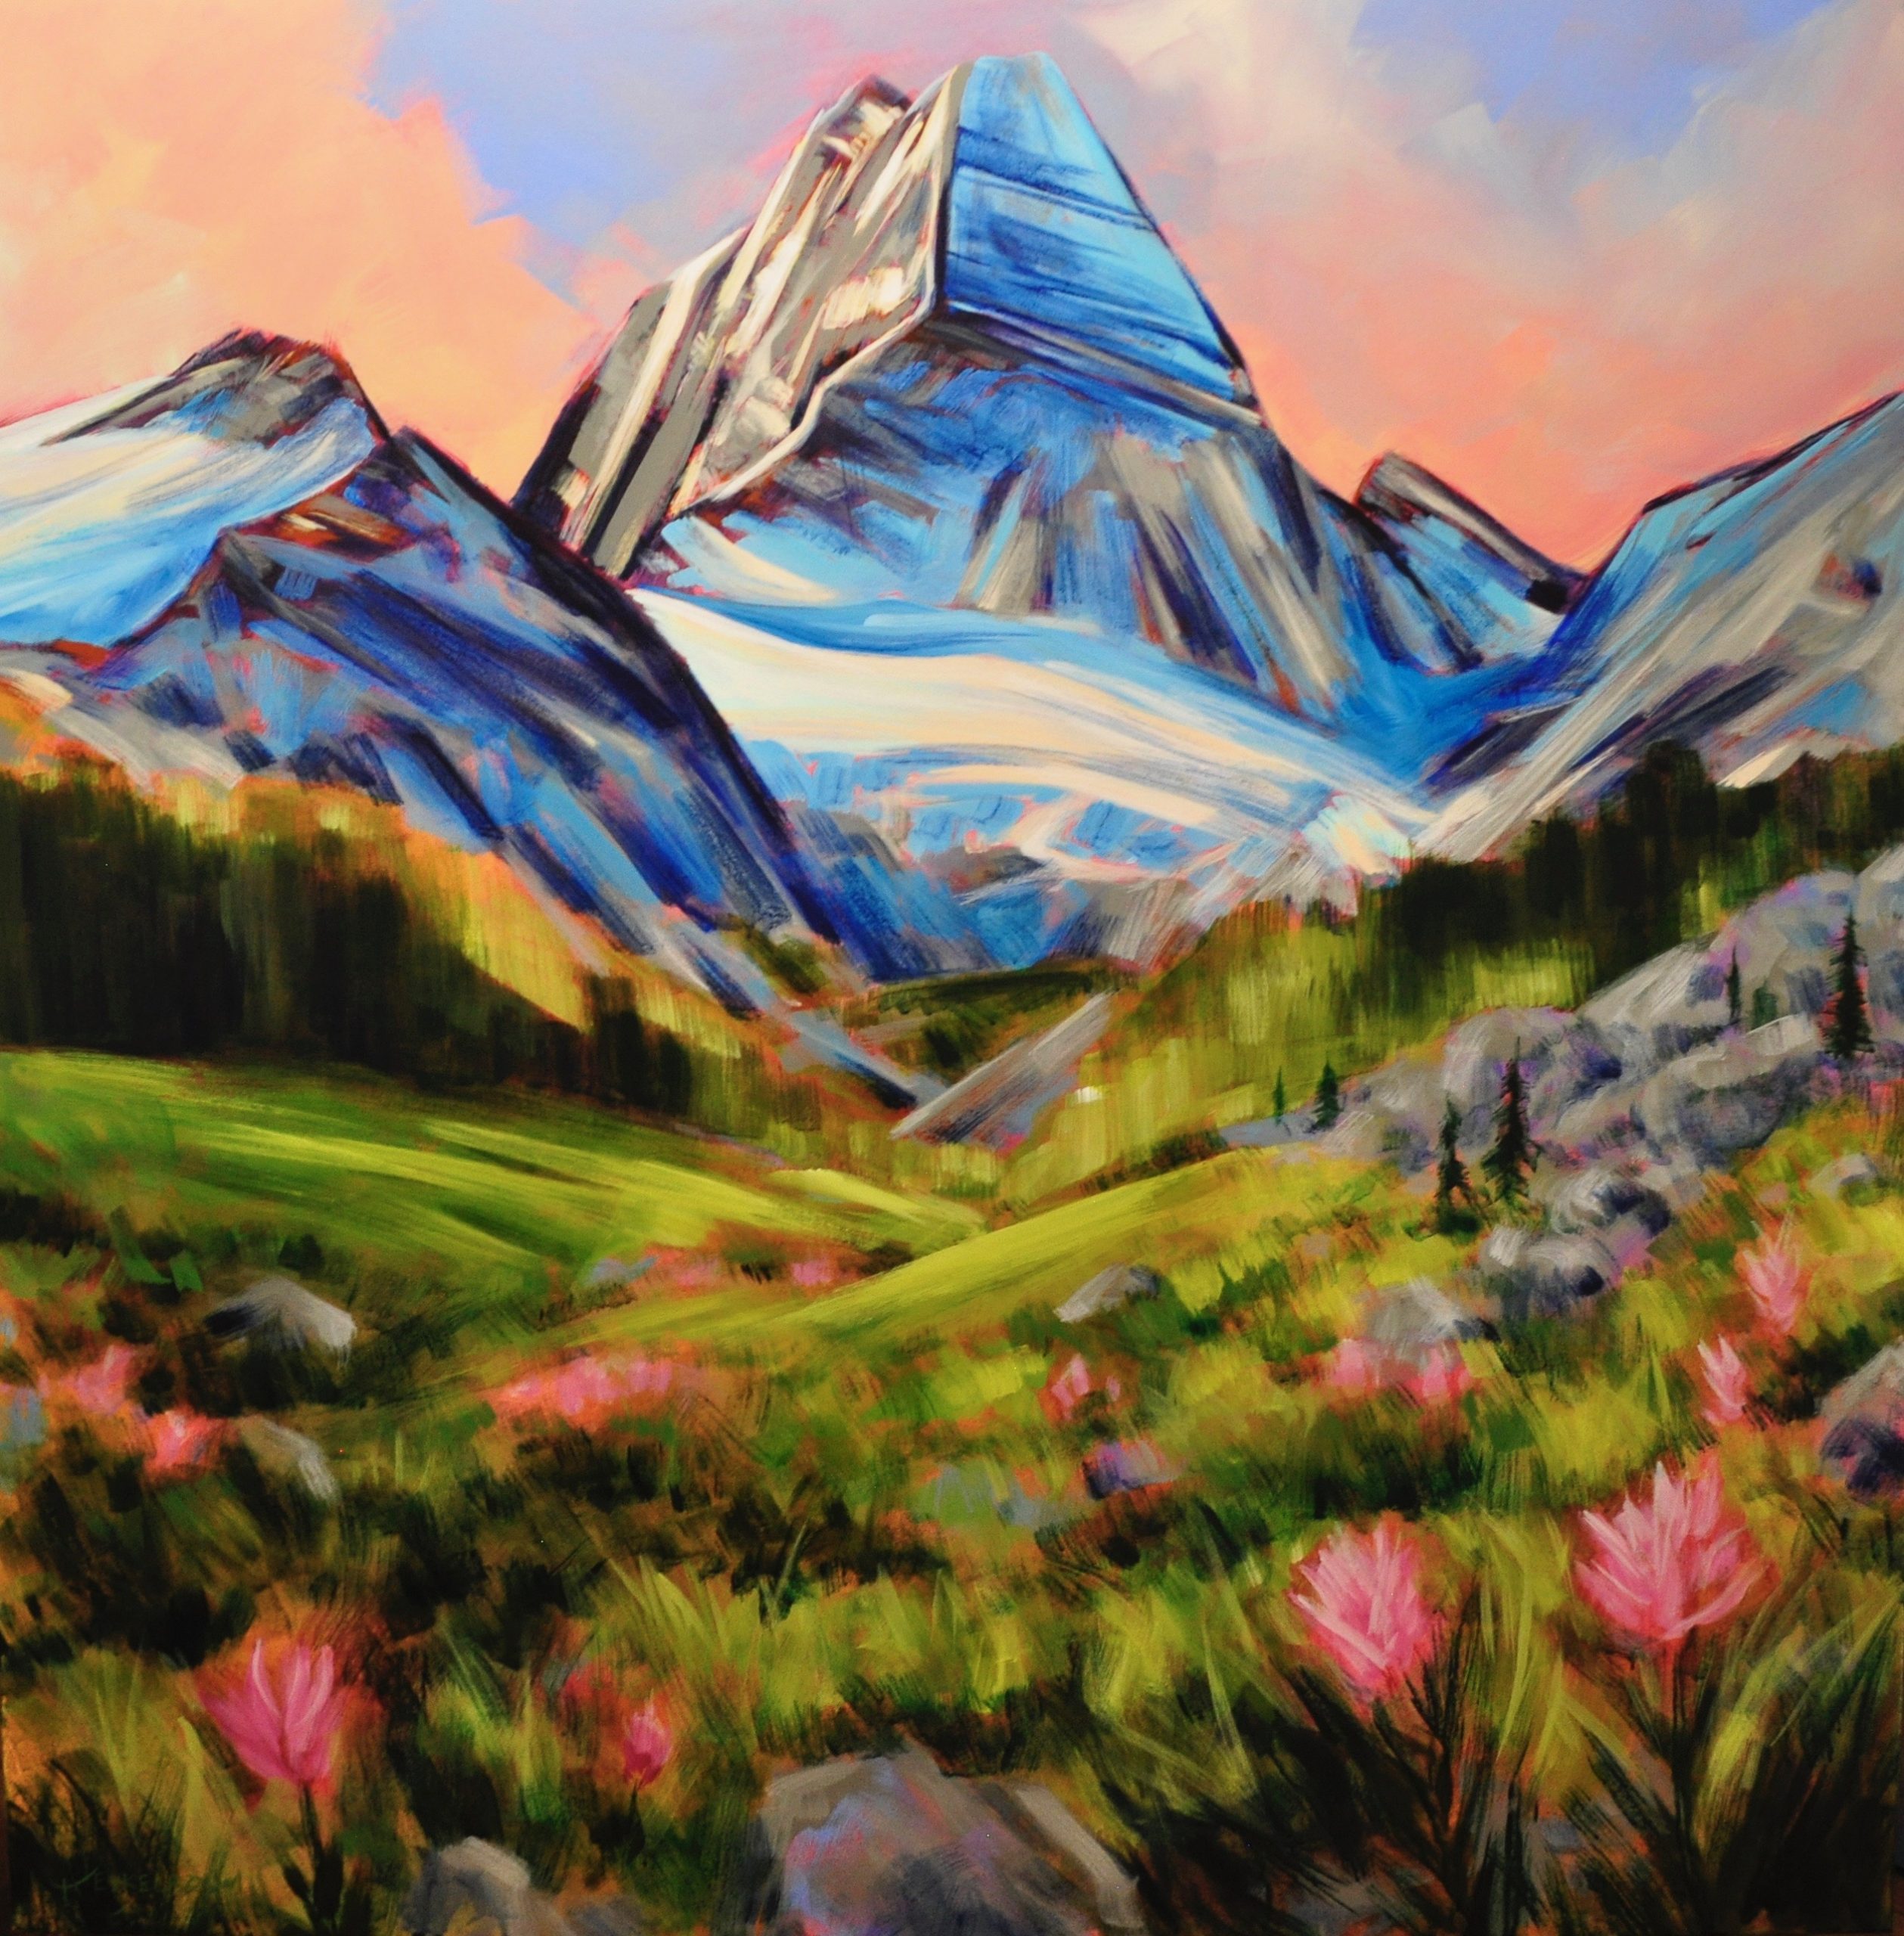 If You Stay, acrylic landscape painting by Kayla Eykelboom | Effusion Art Gallery + Cast Glass Studio, Invermere BC